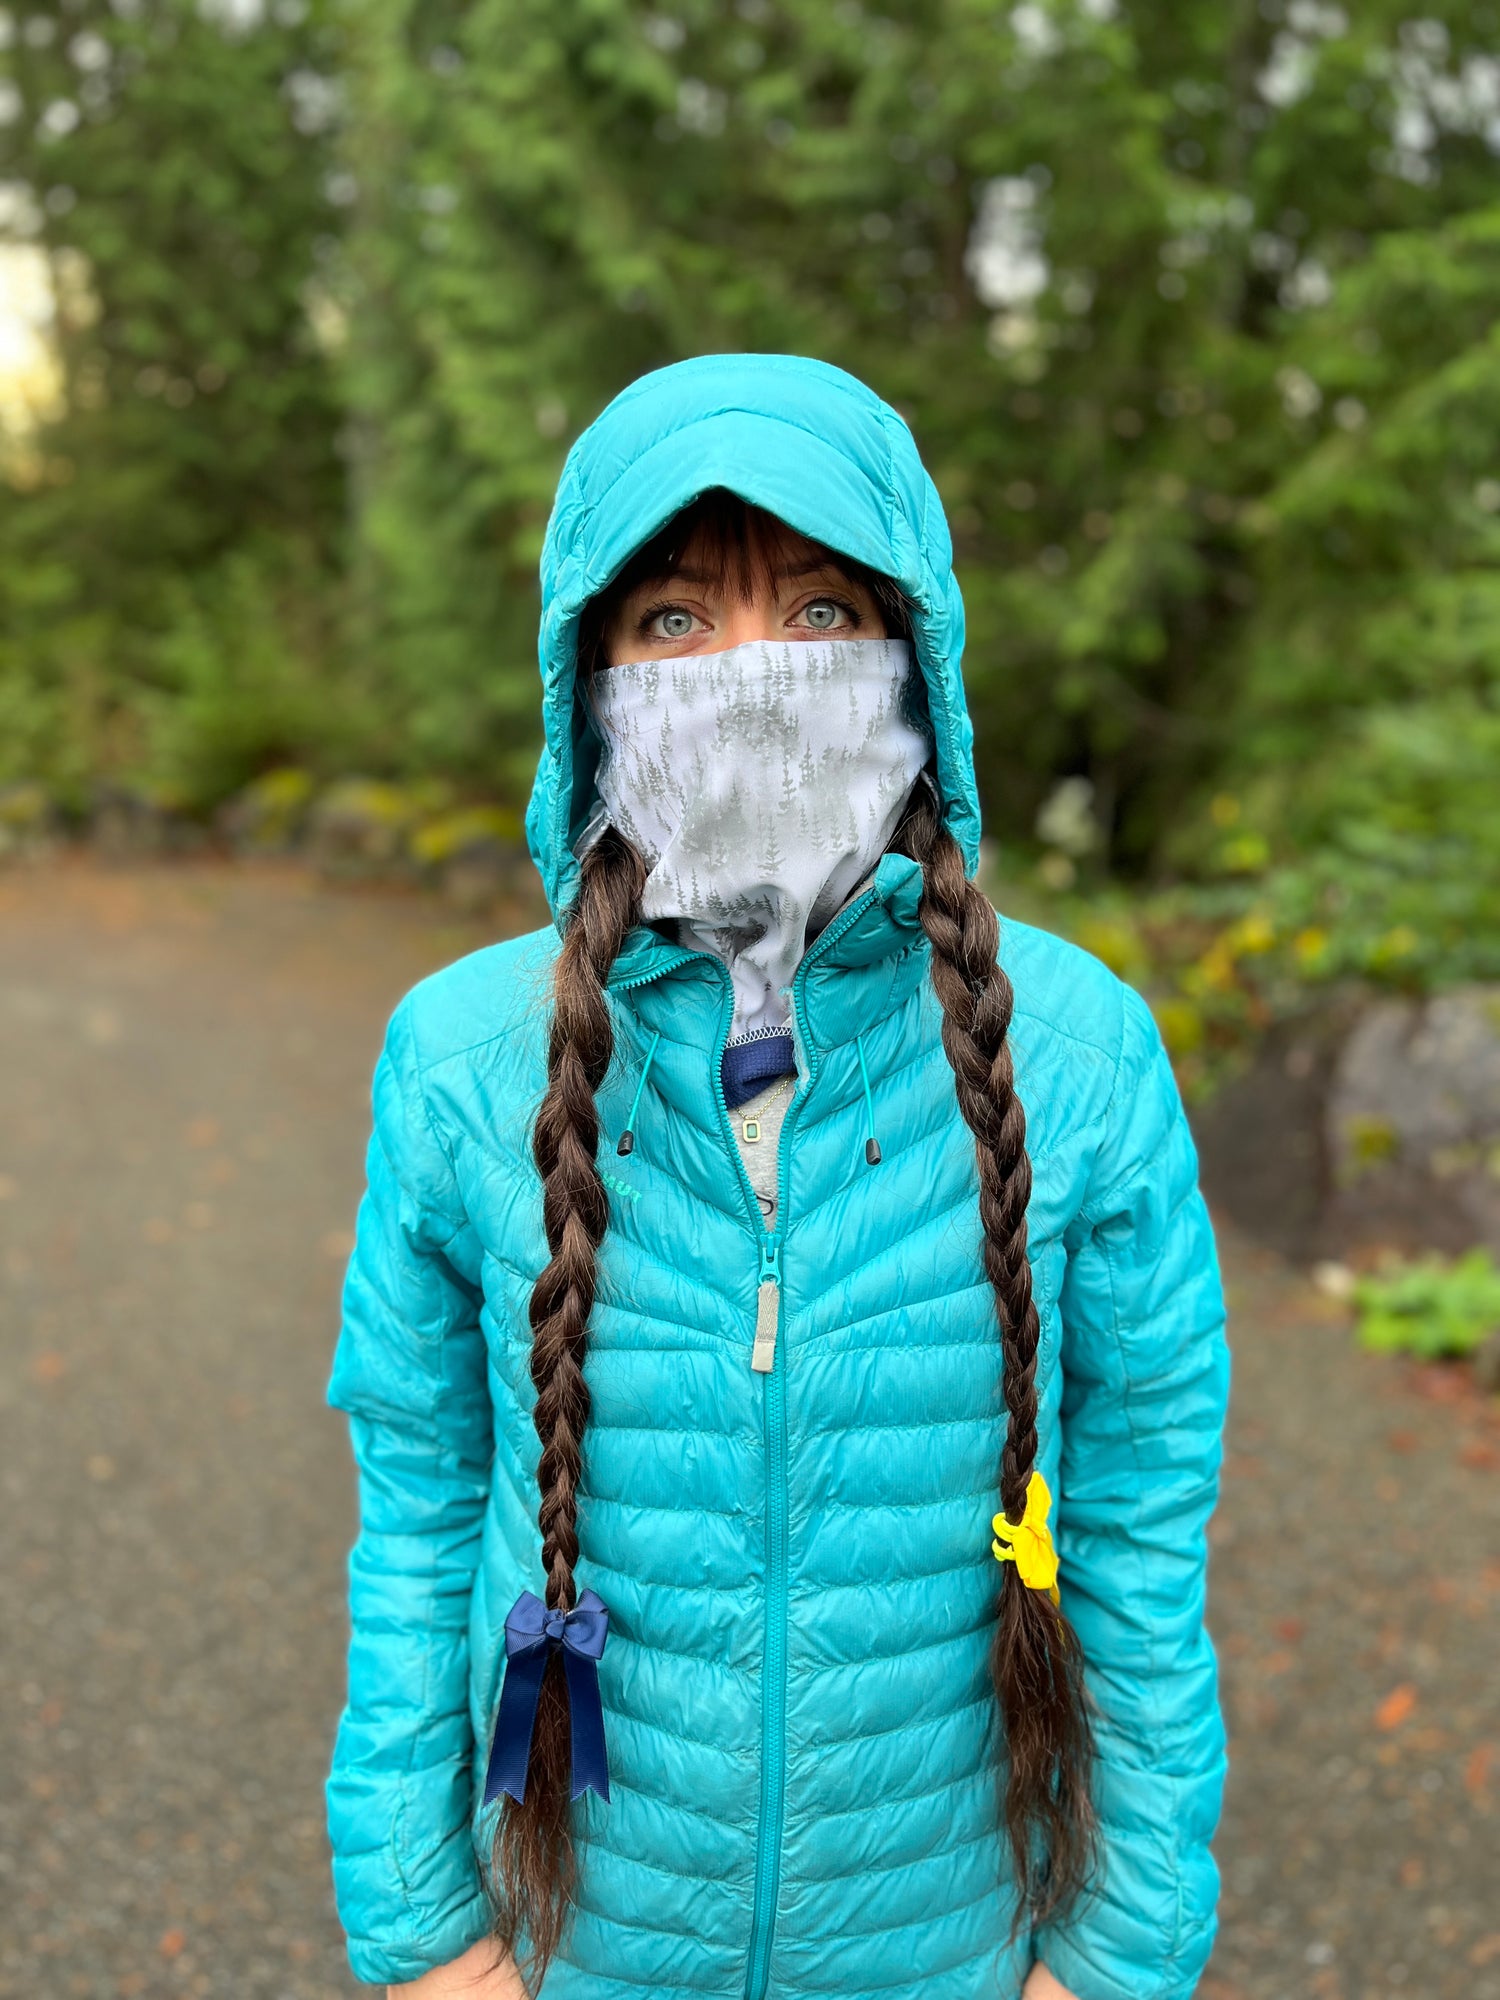 Rapunzel Neck Gaiter (patent pending pigtail ports for people with long hair!) - 3 Colors!